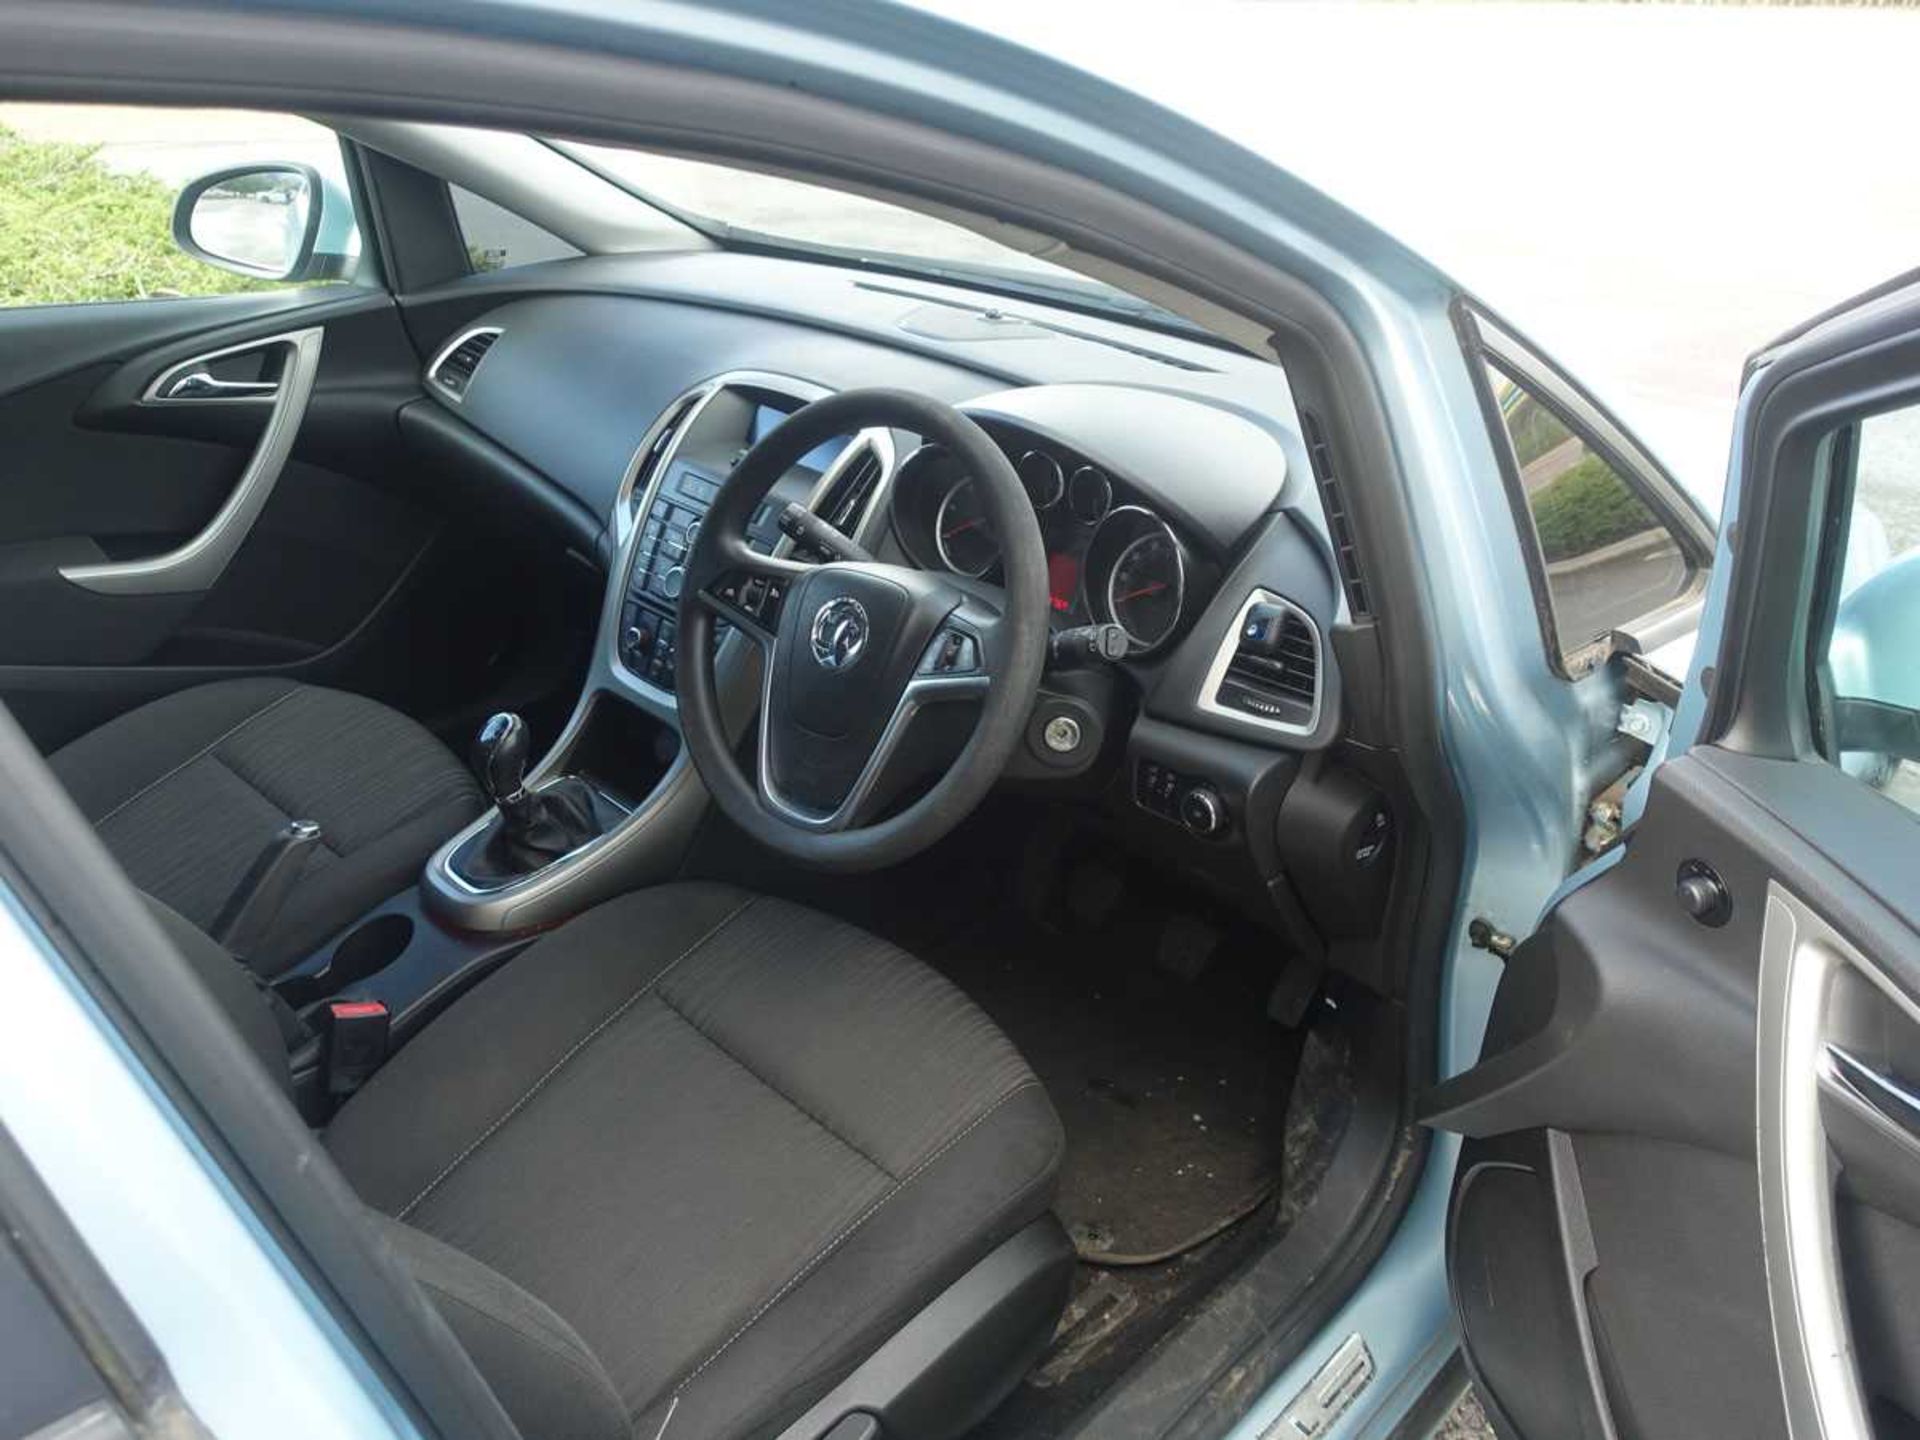 (VN59 YXK) Vauxhall Astra Exclusiv CDTI 108 in blue, first registered 17/12/2009, 6 speed, 5 door - Image 8 of 11